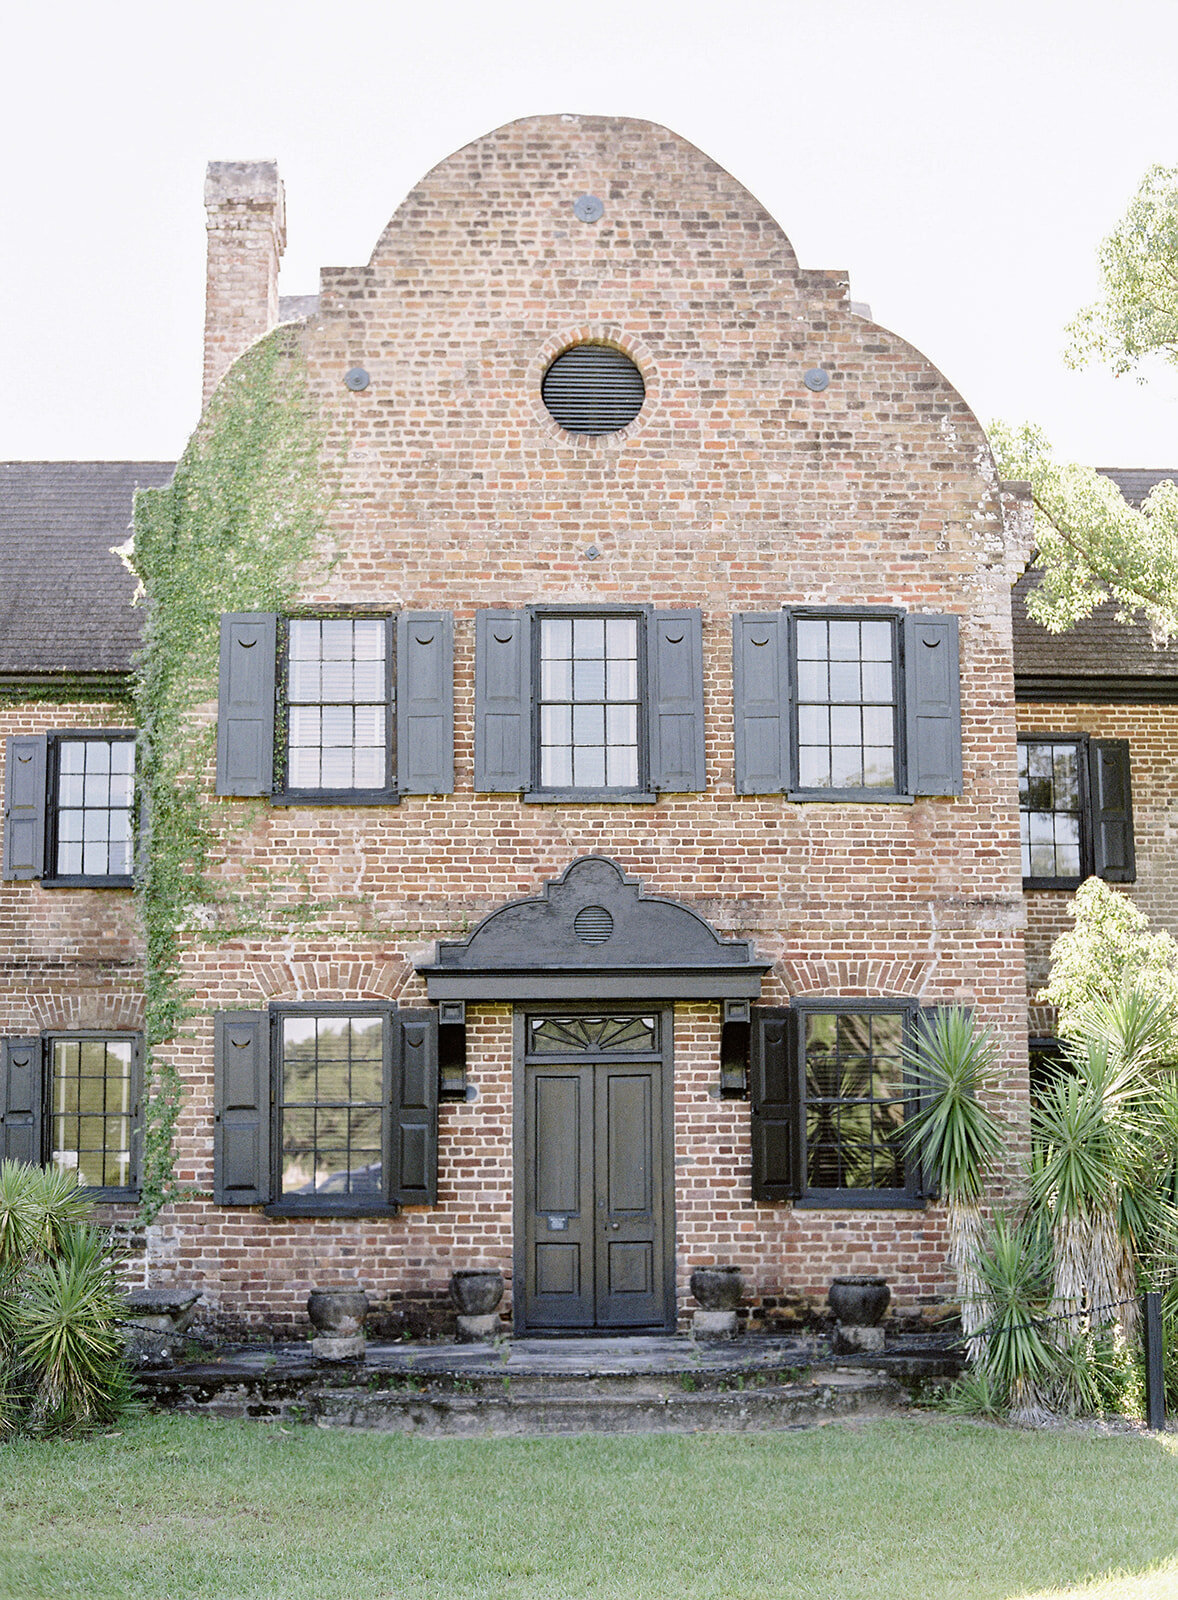 The front of Middleton Place. All brick house with black shutters, black door, and black trim. Palm trees surrounding each side. Photographed by wedding photographers in Charleston Amy Mulder Photography